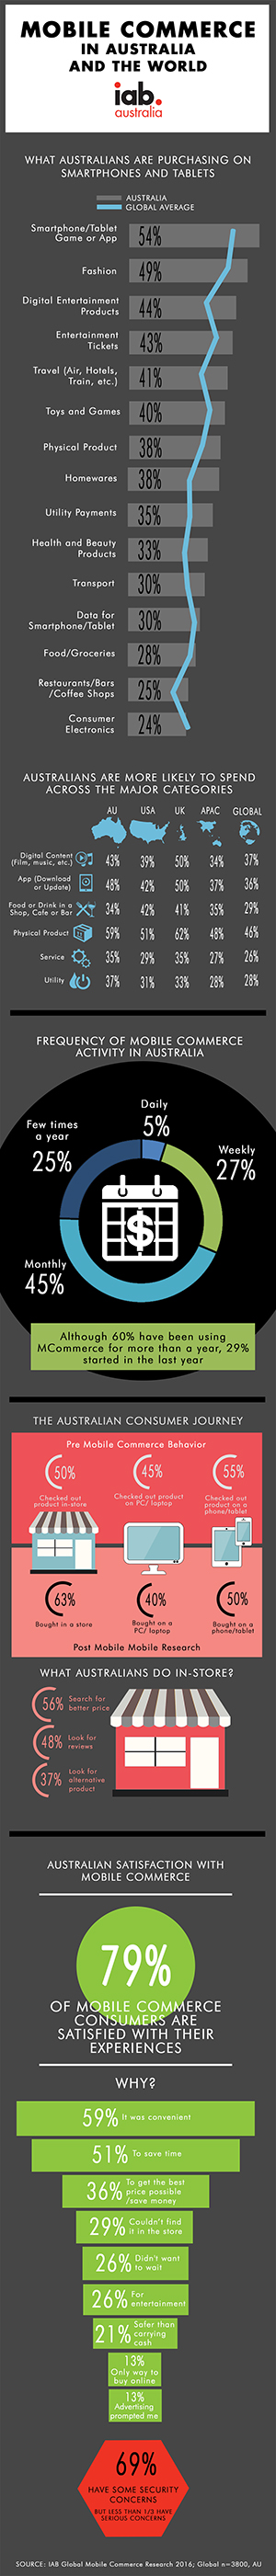 MCOMM Infographic OCT 2016 SMALL